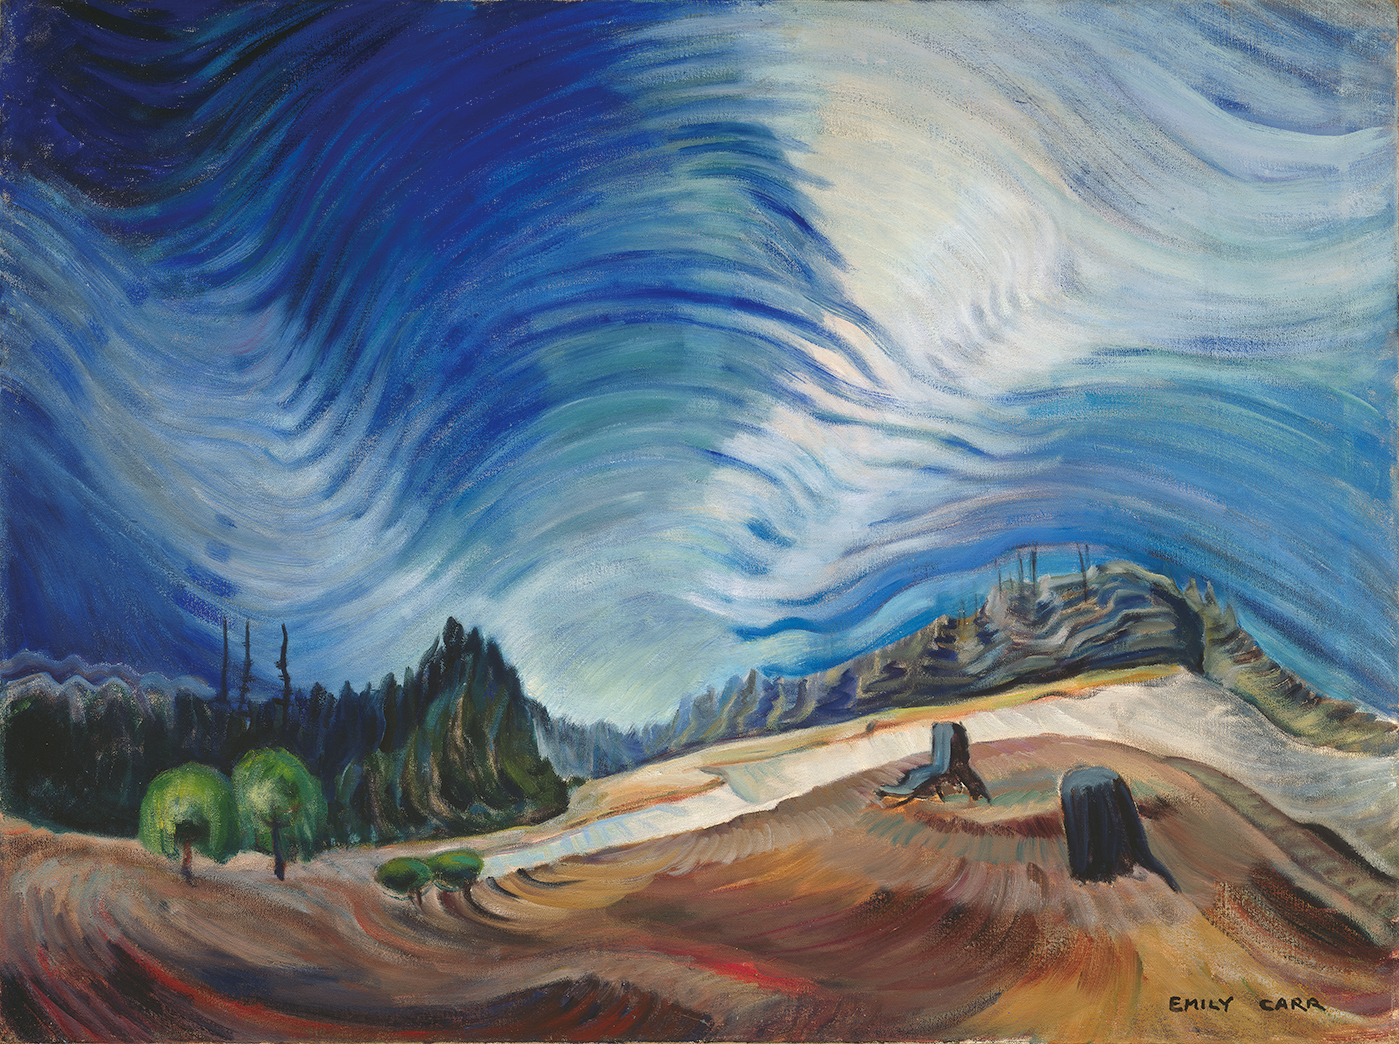 Painting of a landscape with tree stumps in the foreground.